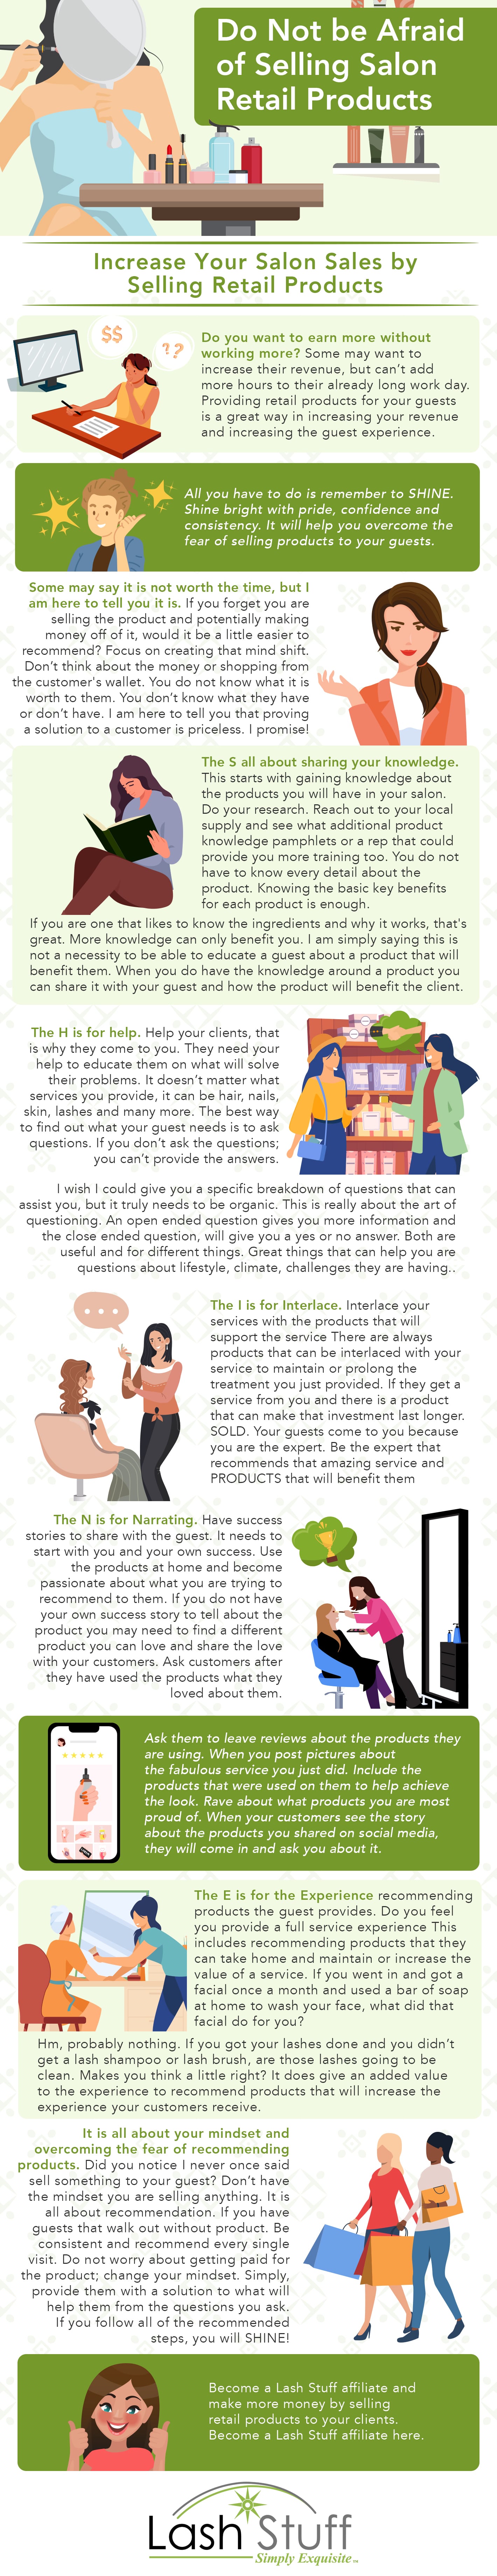 Info Graphic on how to sell products to salon clients